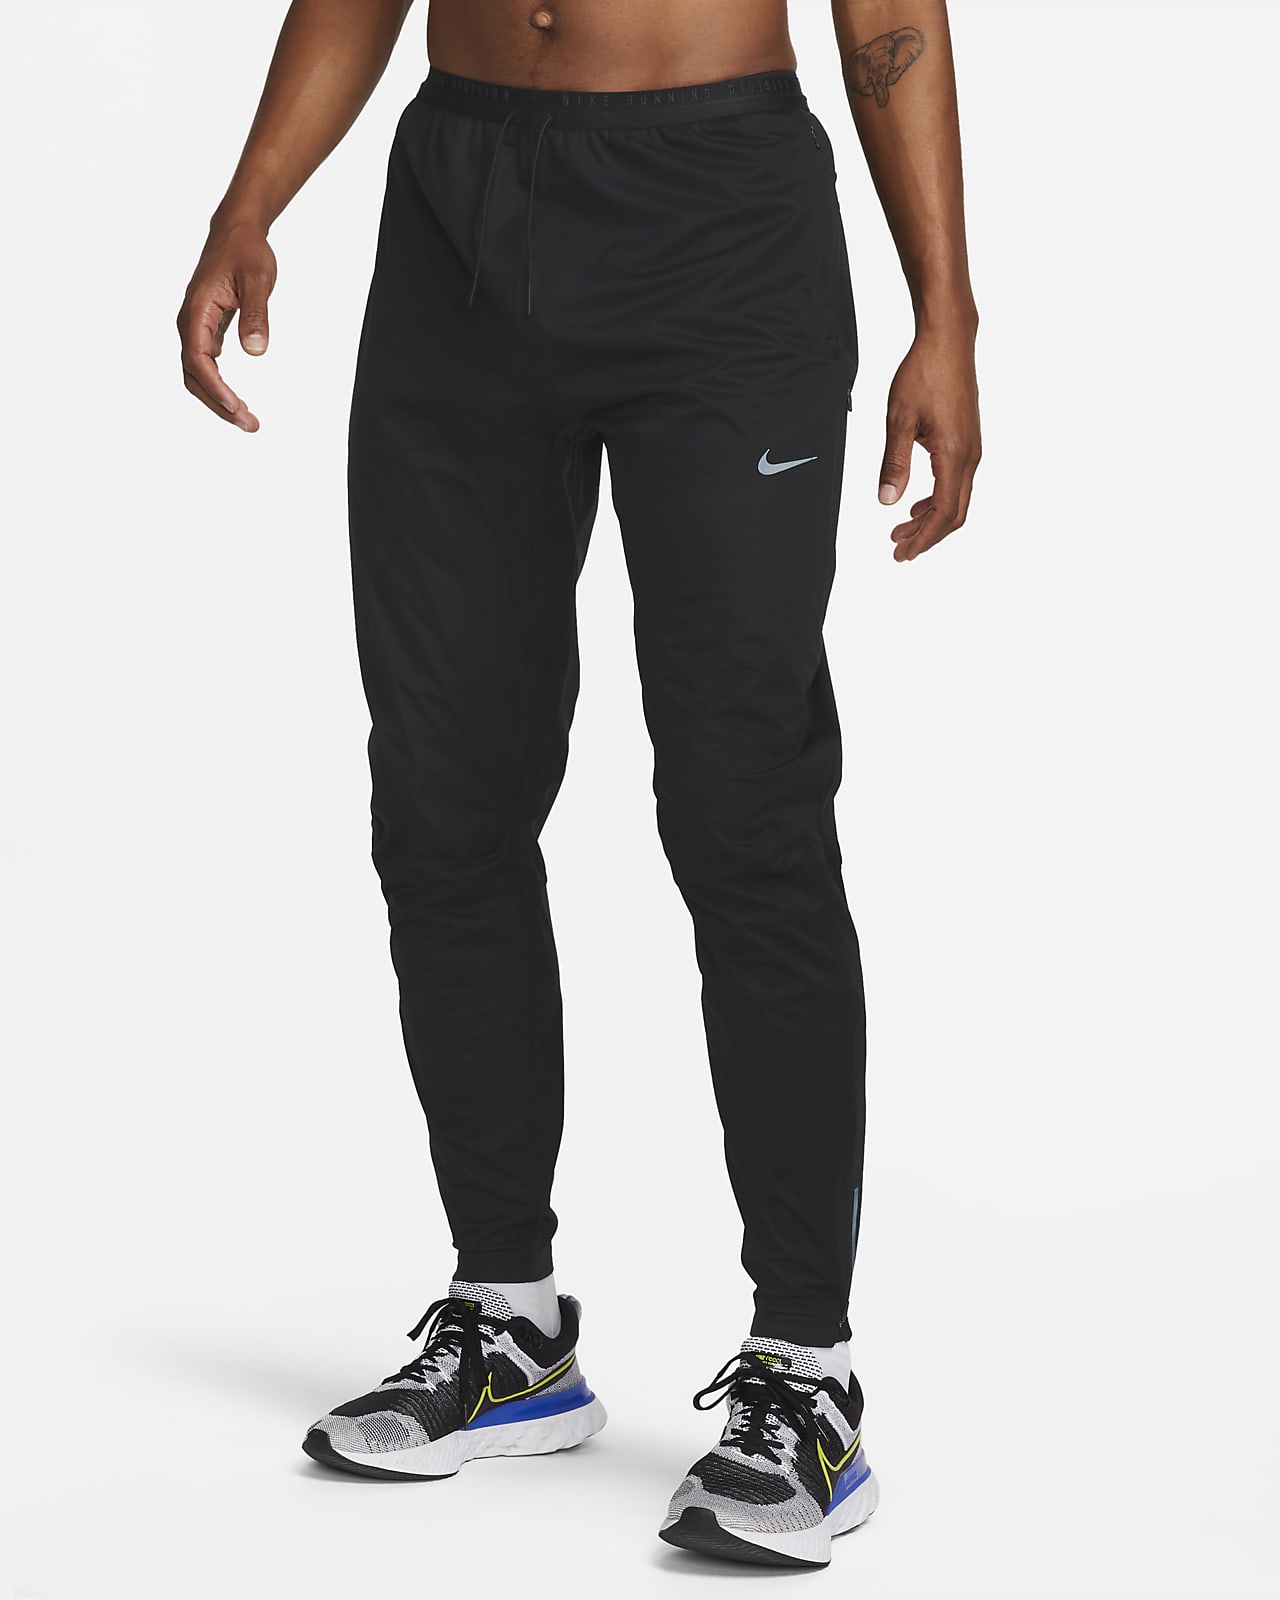 Nike Storm-FIT ADV Run Division Men's Running Trousers